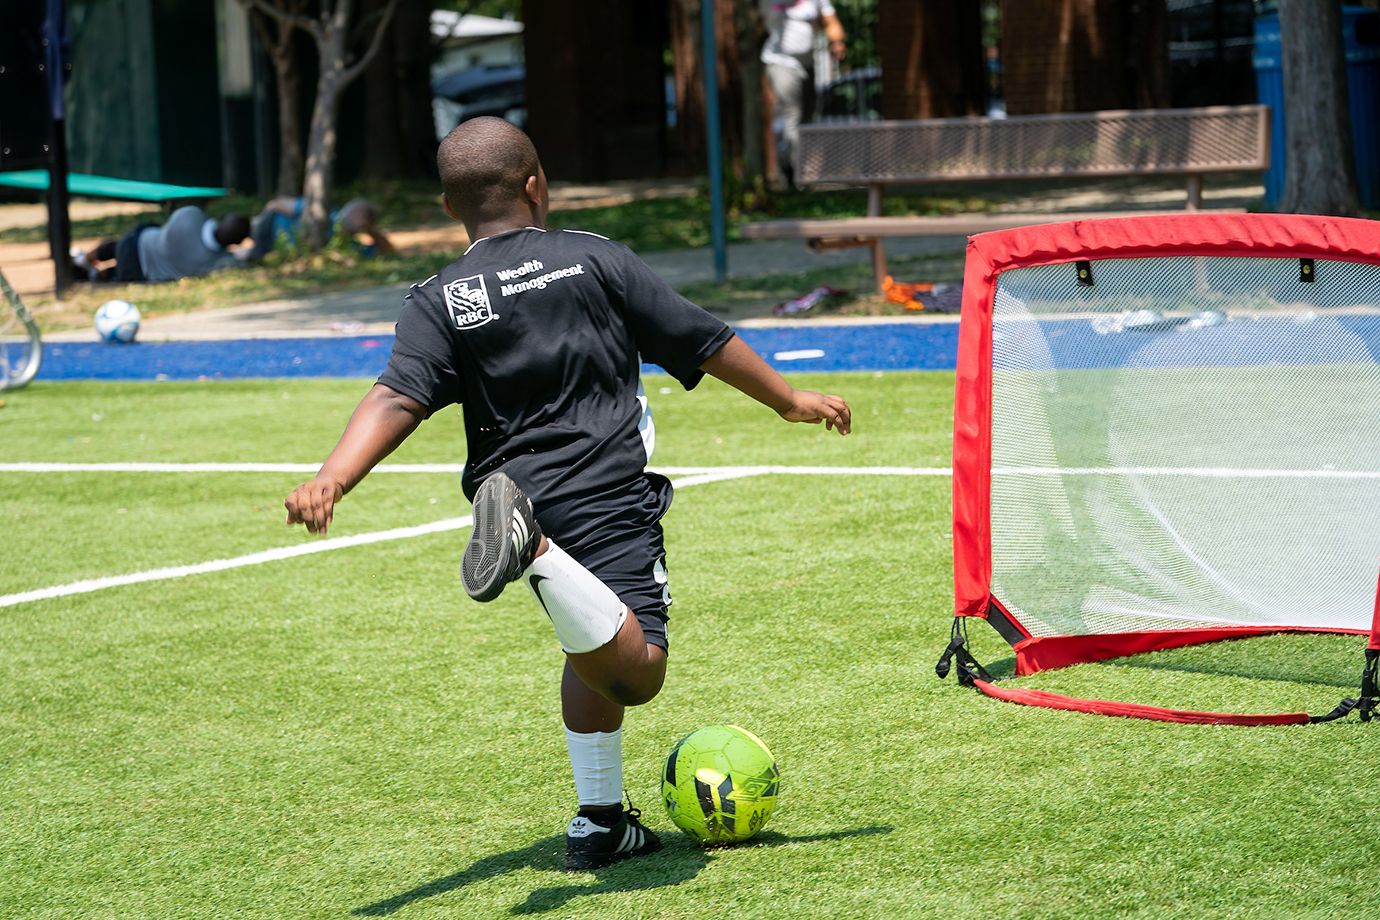 Photo of young soccer player kicking a ball in net.